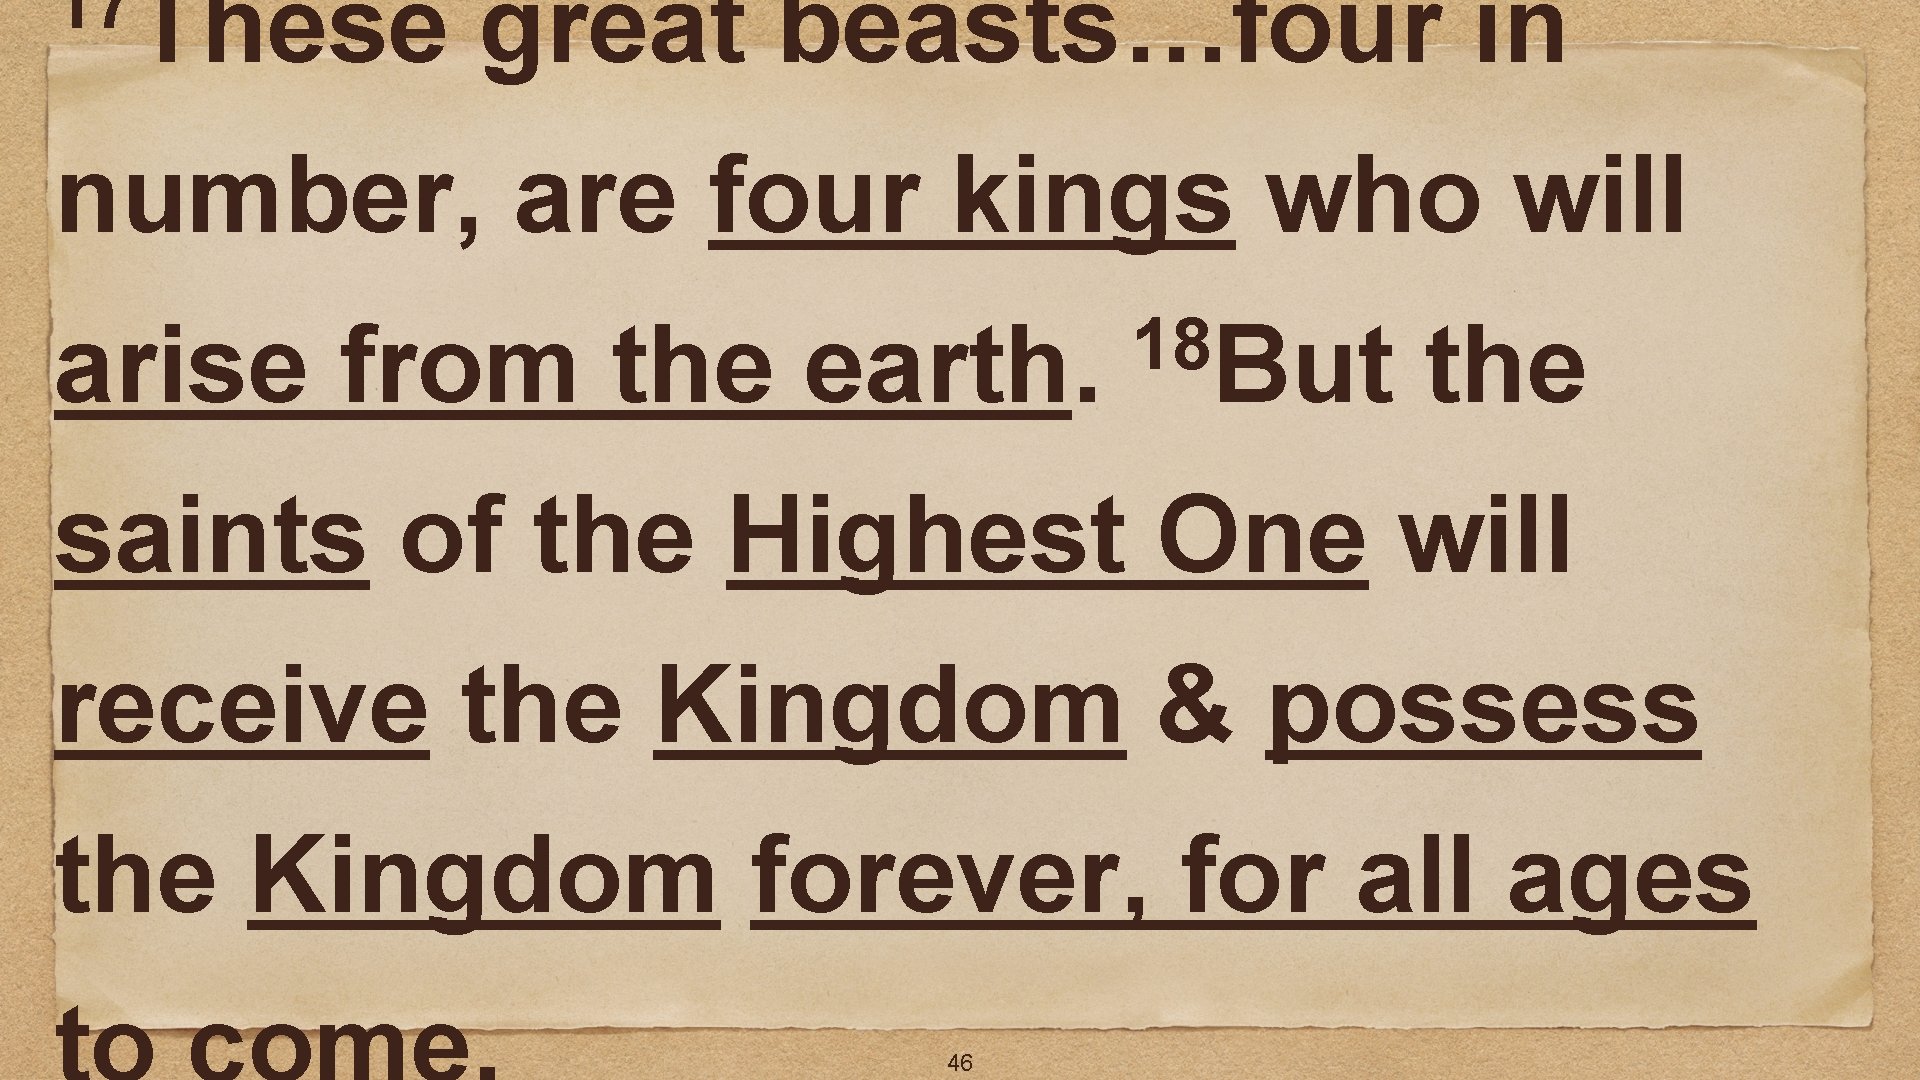 17 These great beasts…four in number, are four kings who will arise from the